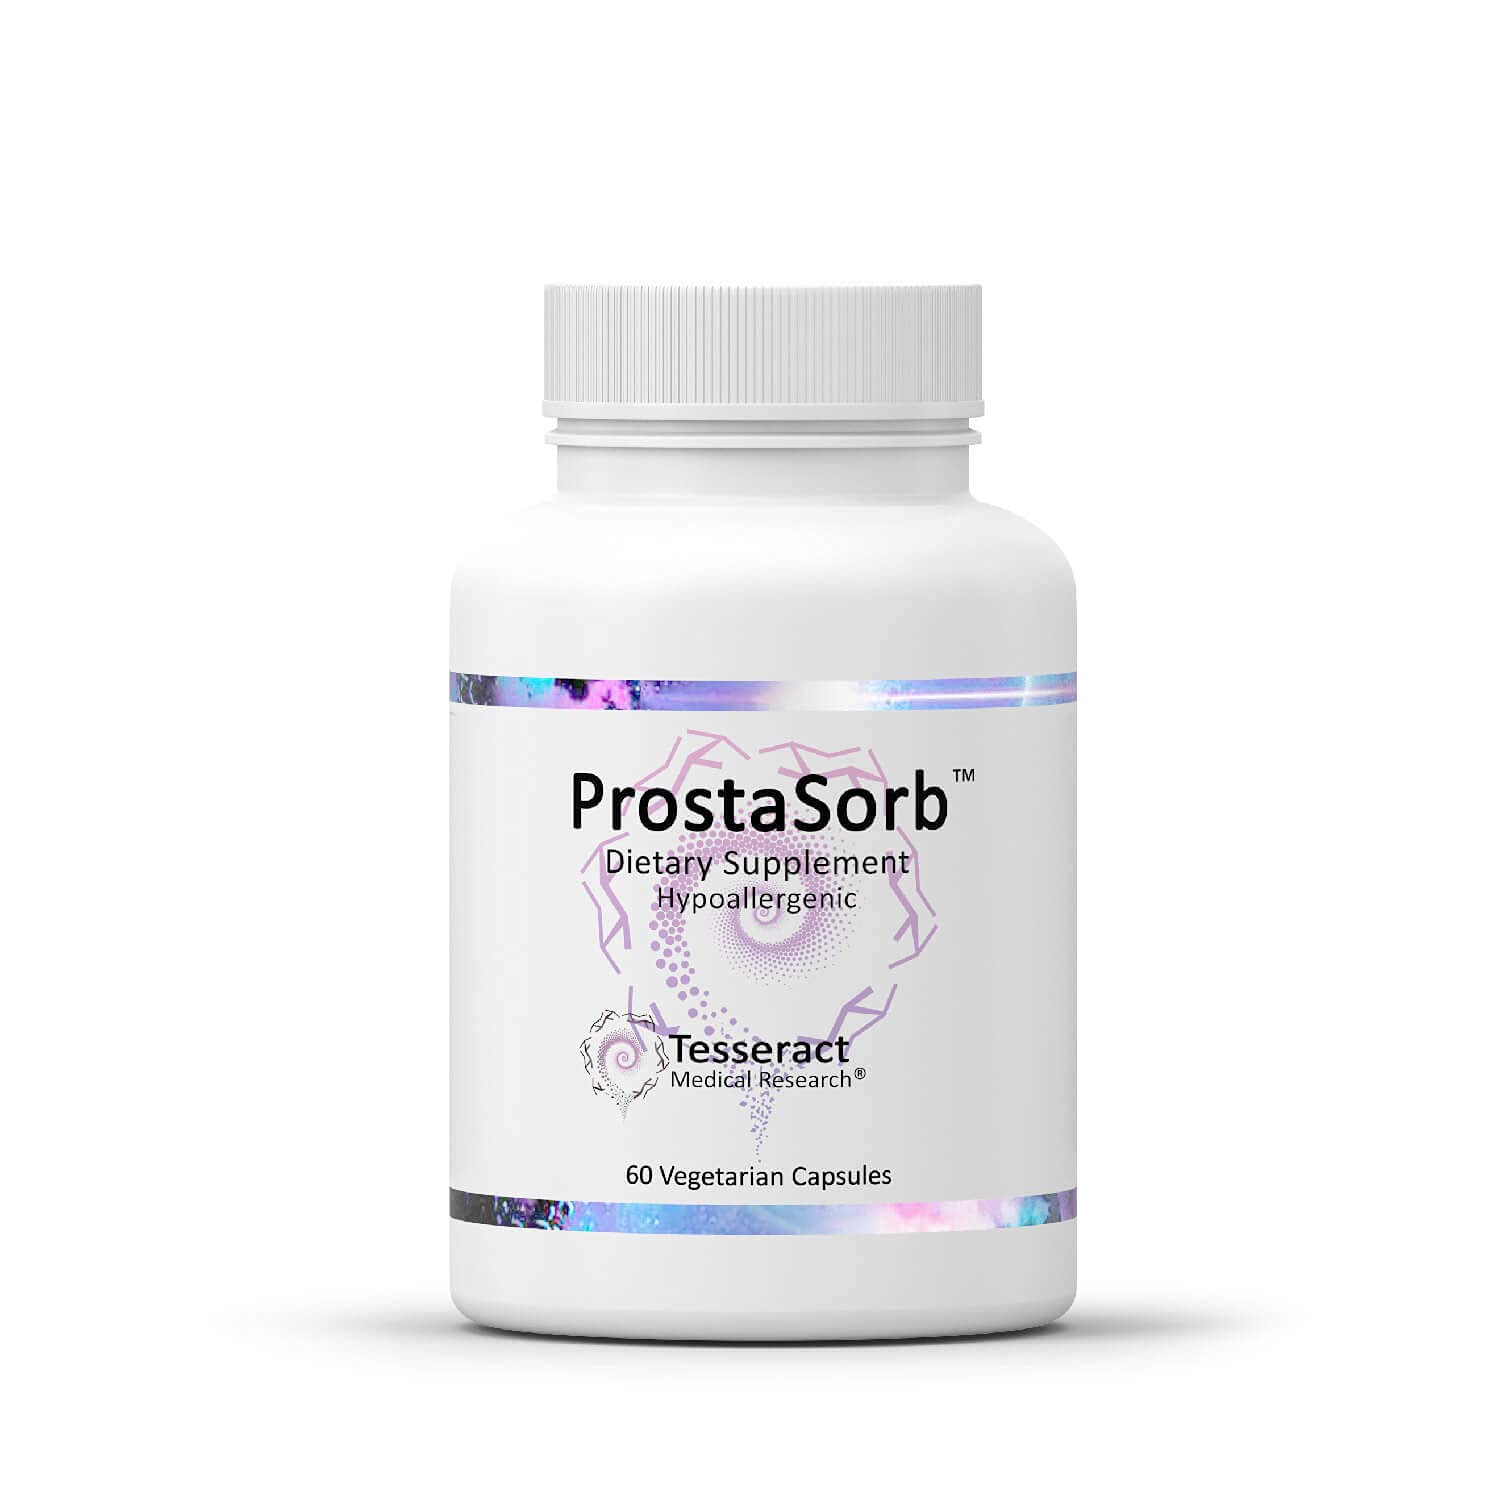 Tesseract Medical Research ProstaSorb Prostate Supplement, Hypoallergenic, 60 Count Bottle